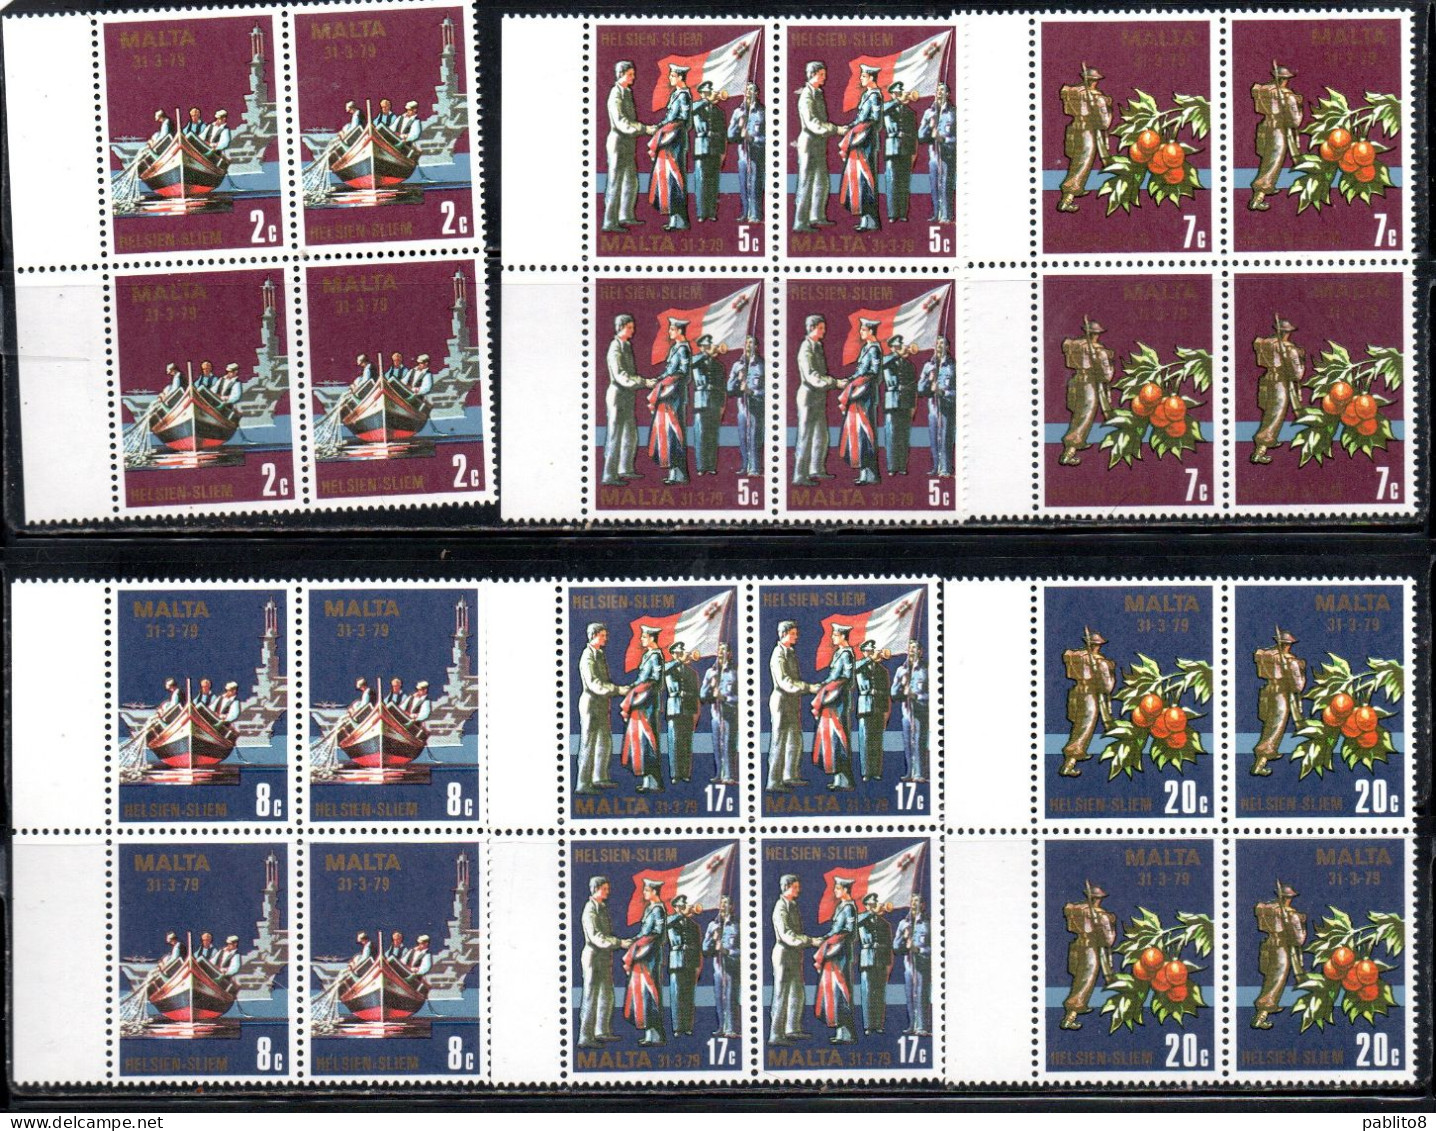 MALTA 1979 END OF MILITARY FACILITIES AGREEMENT WITH GREAT BRITAIN  COMPLETE SET SERIE COMPLETA BLOCK QUARTINA MNH - Malte